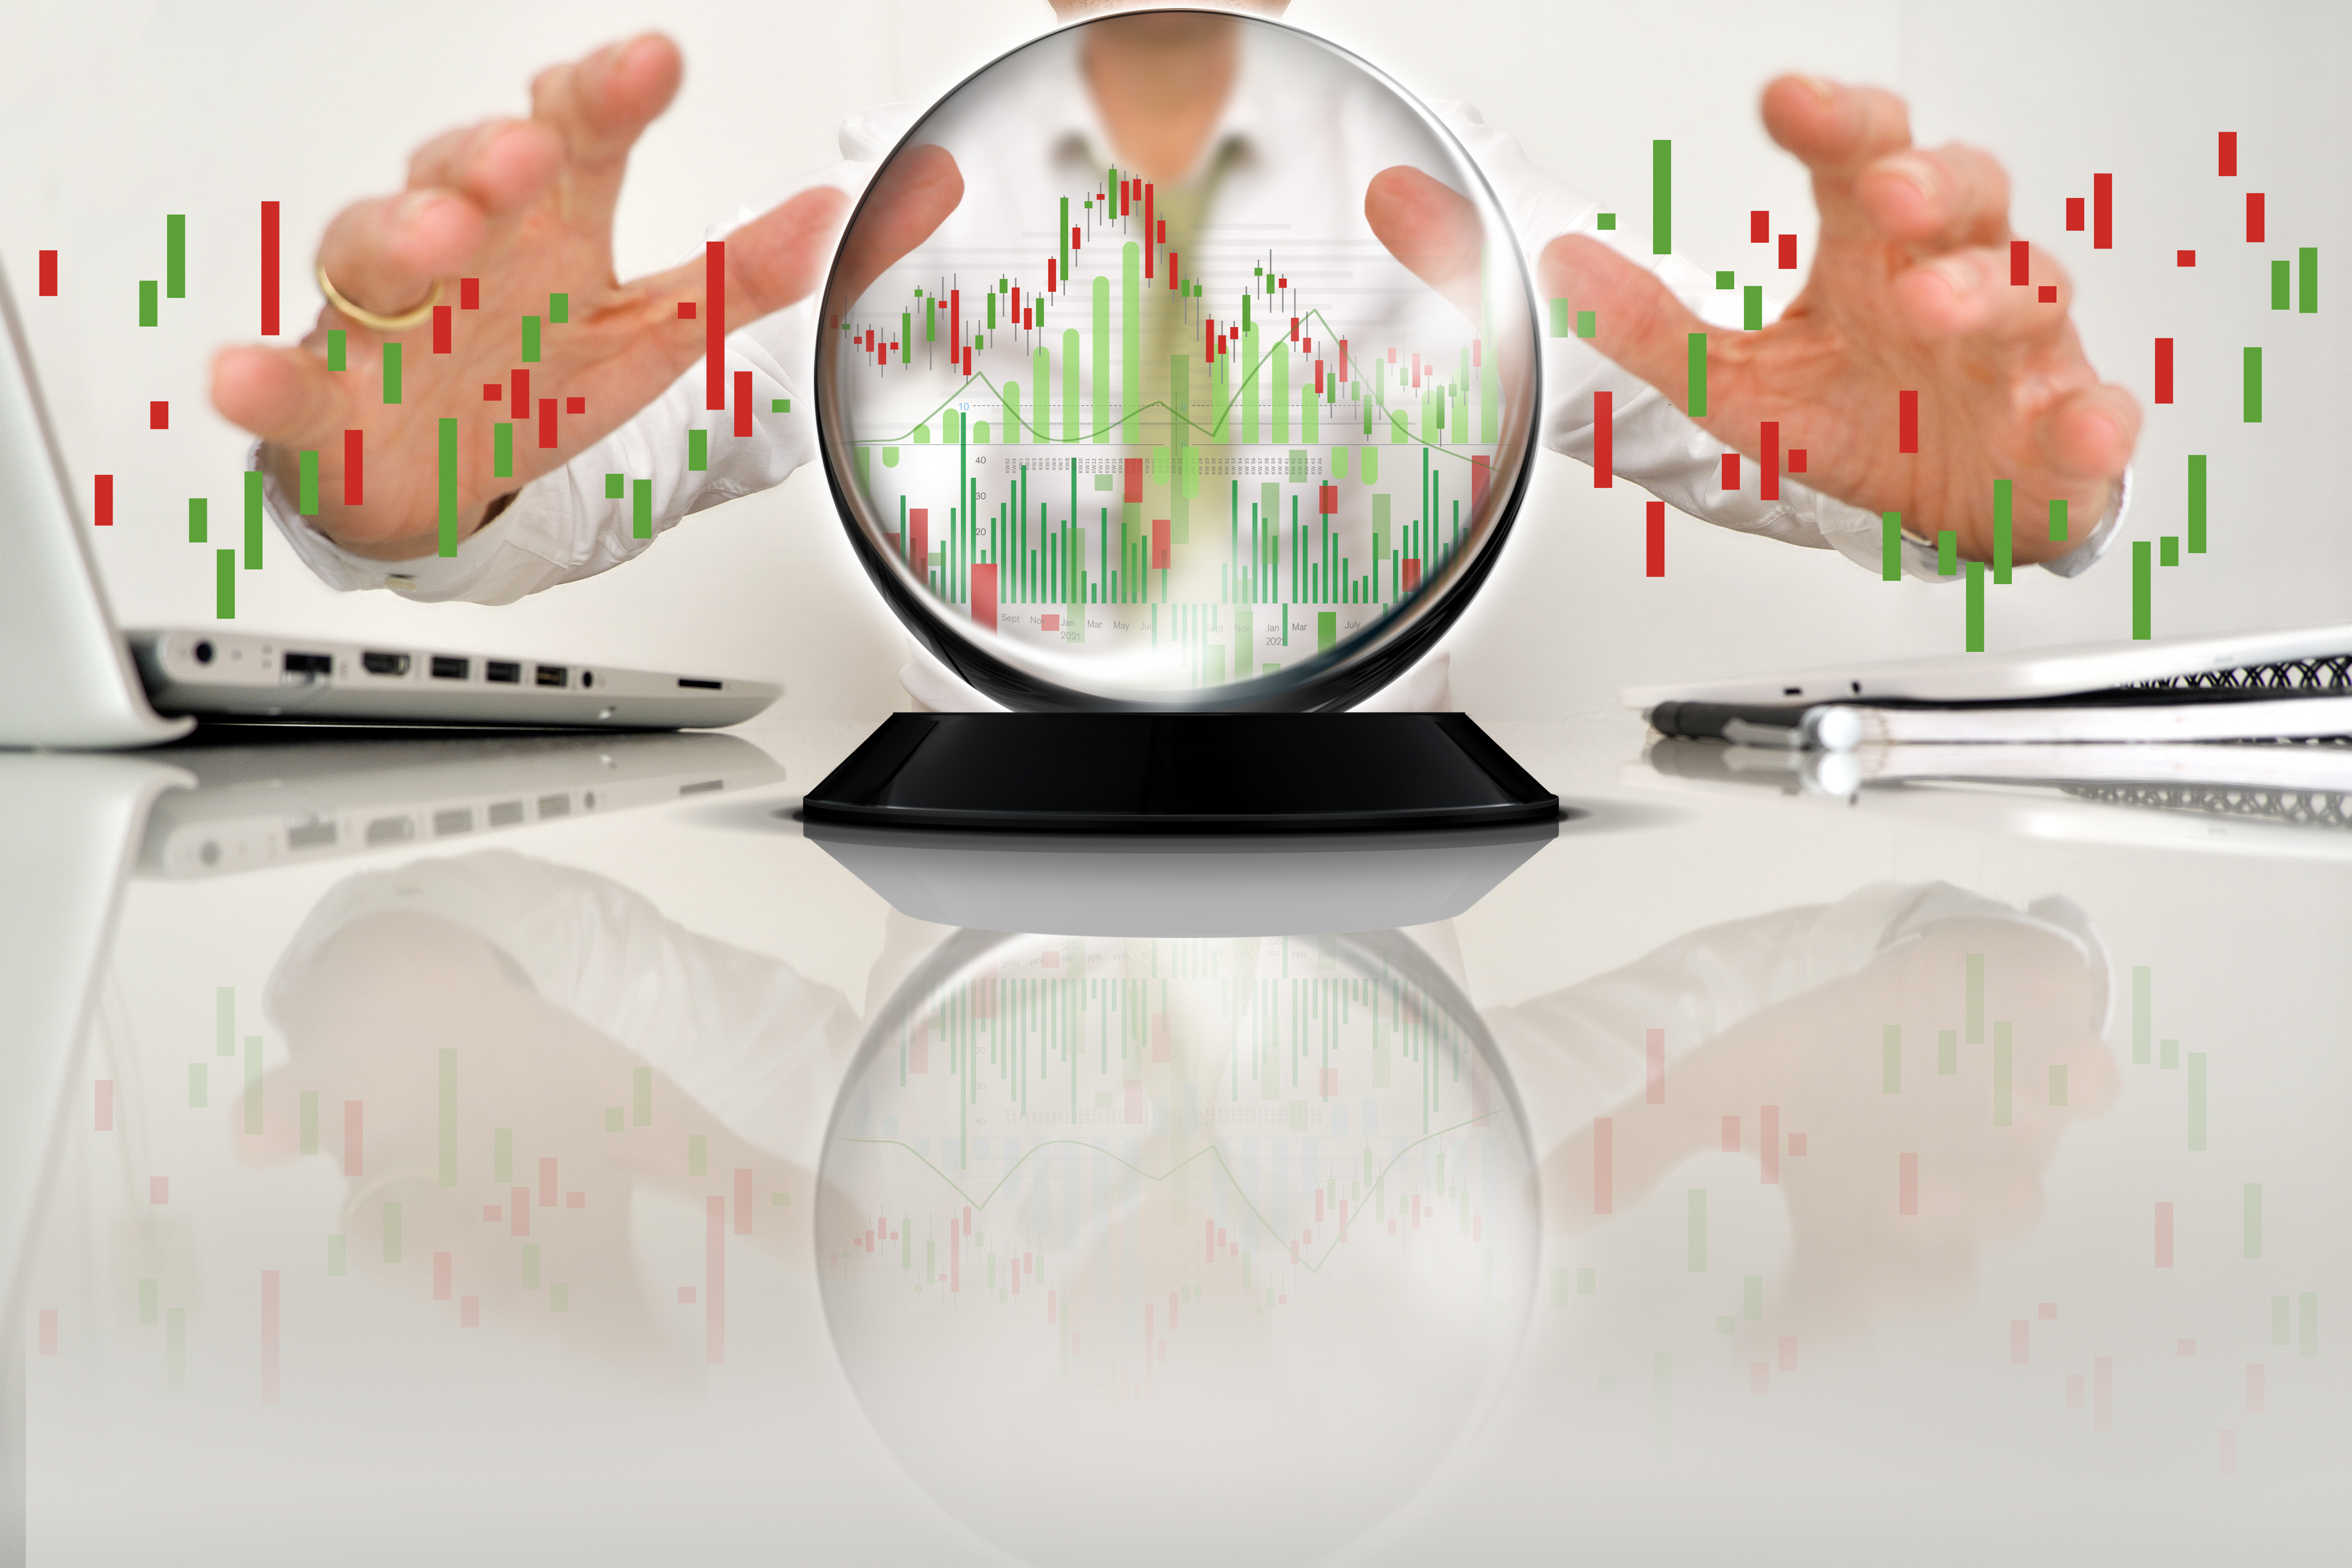 Looking into a crystal ball to predict market activity